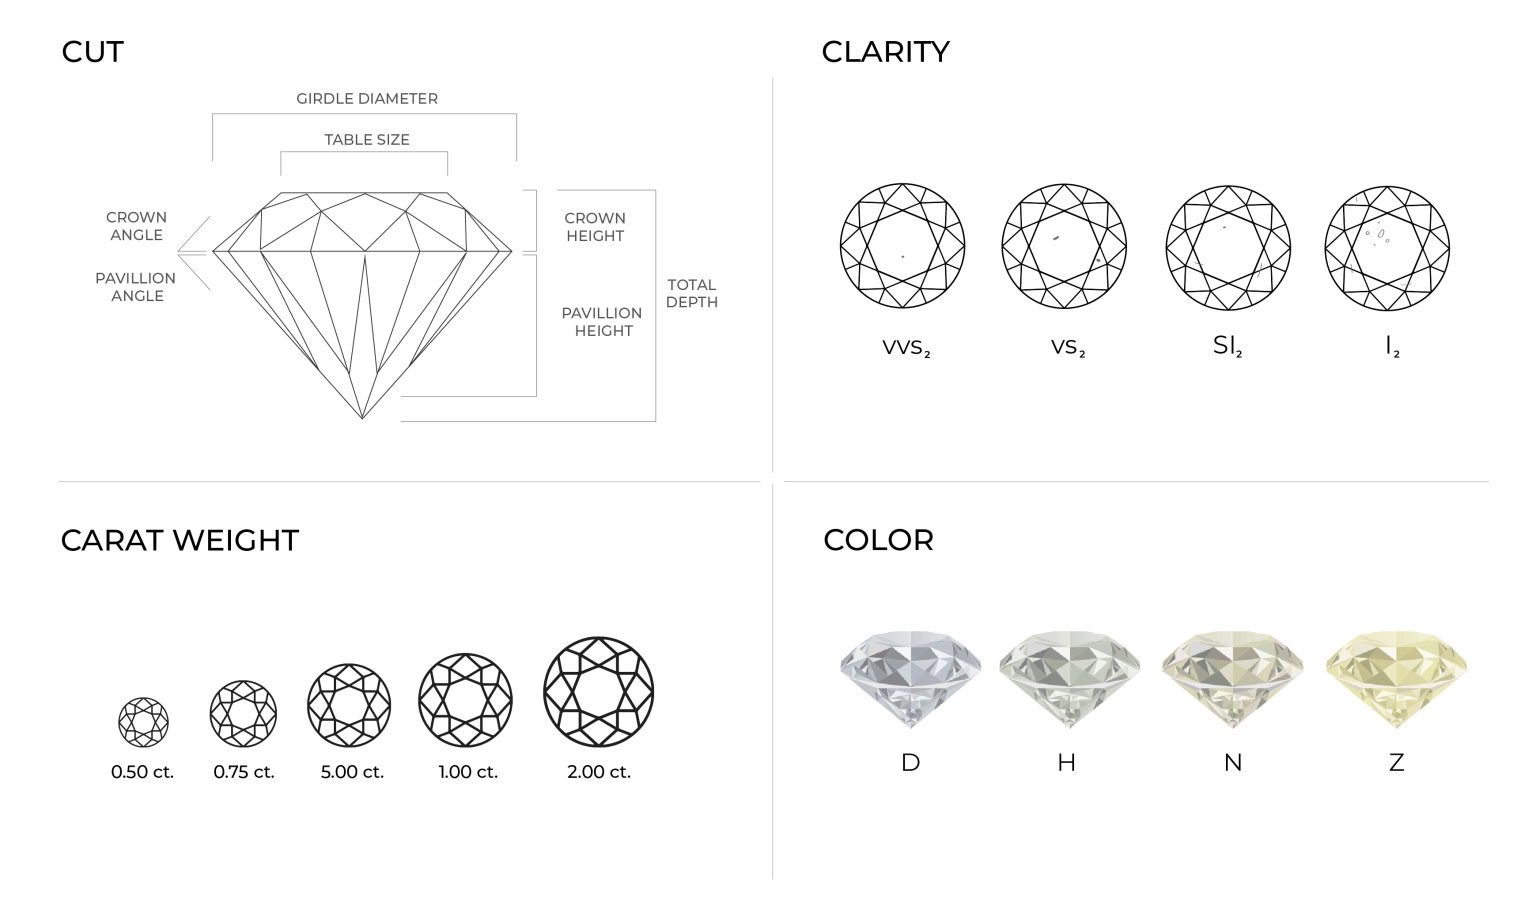 How To Buy An Engagement Ring Using The 4Cs